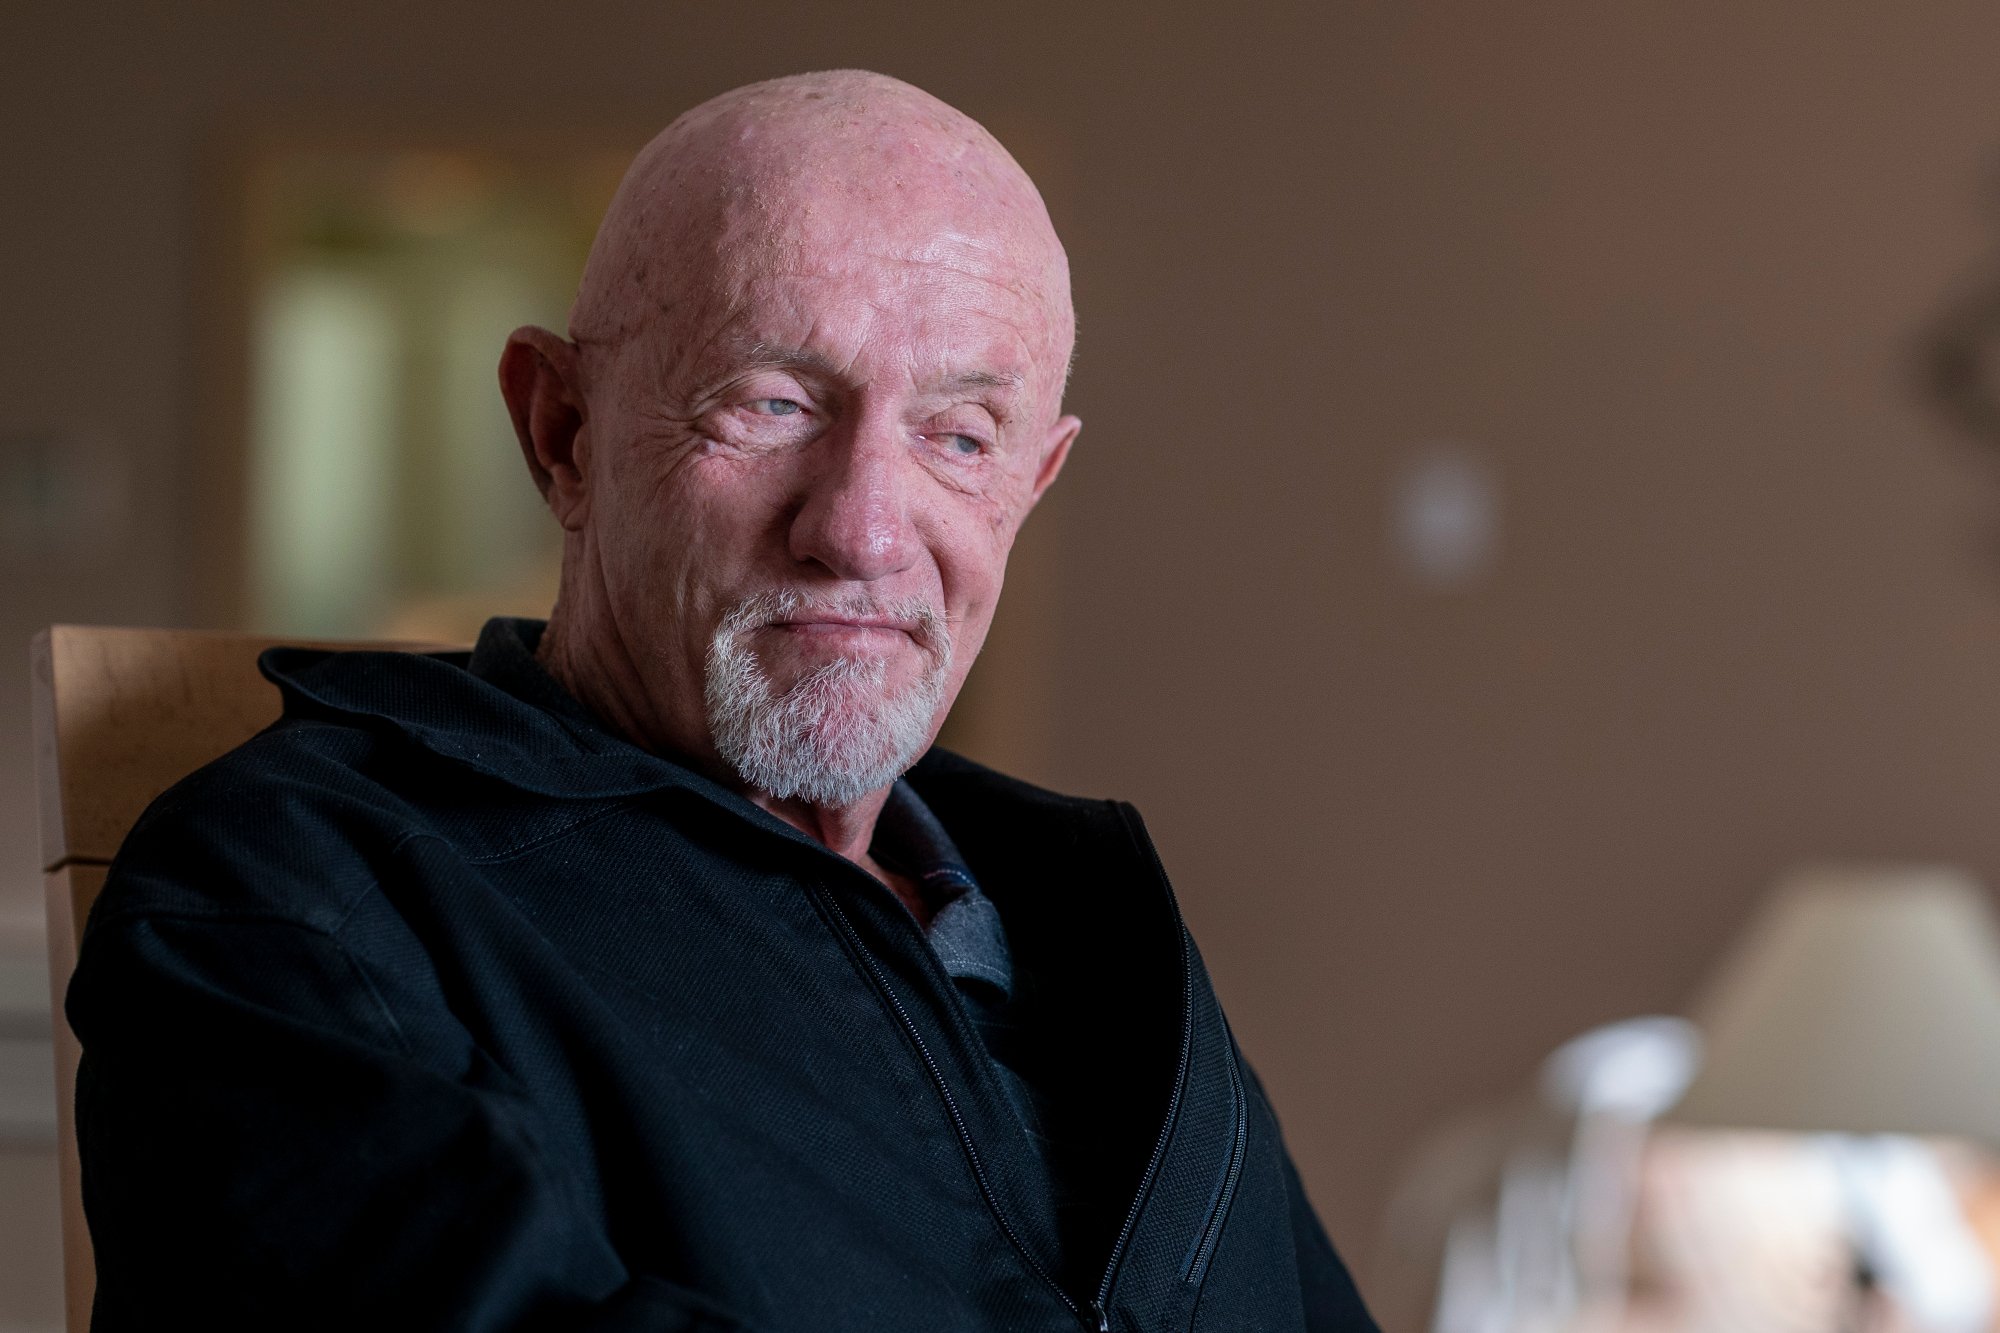 Jonathan Banks as Mike Ehrmantraut in 'Better Call Saul' Season 5. He's wearing a black shirt and smiling.